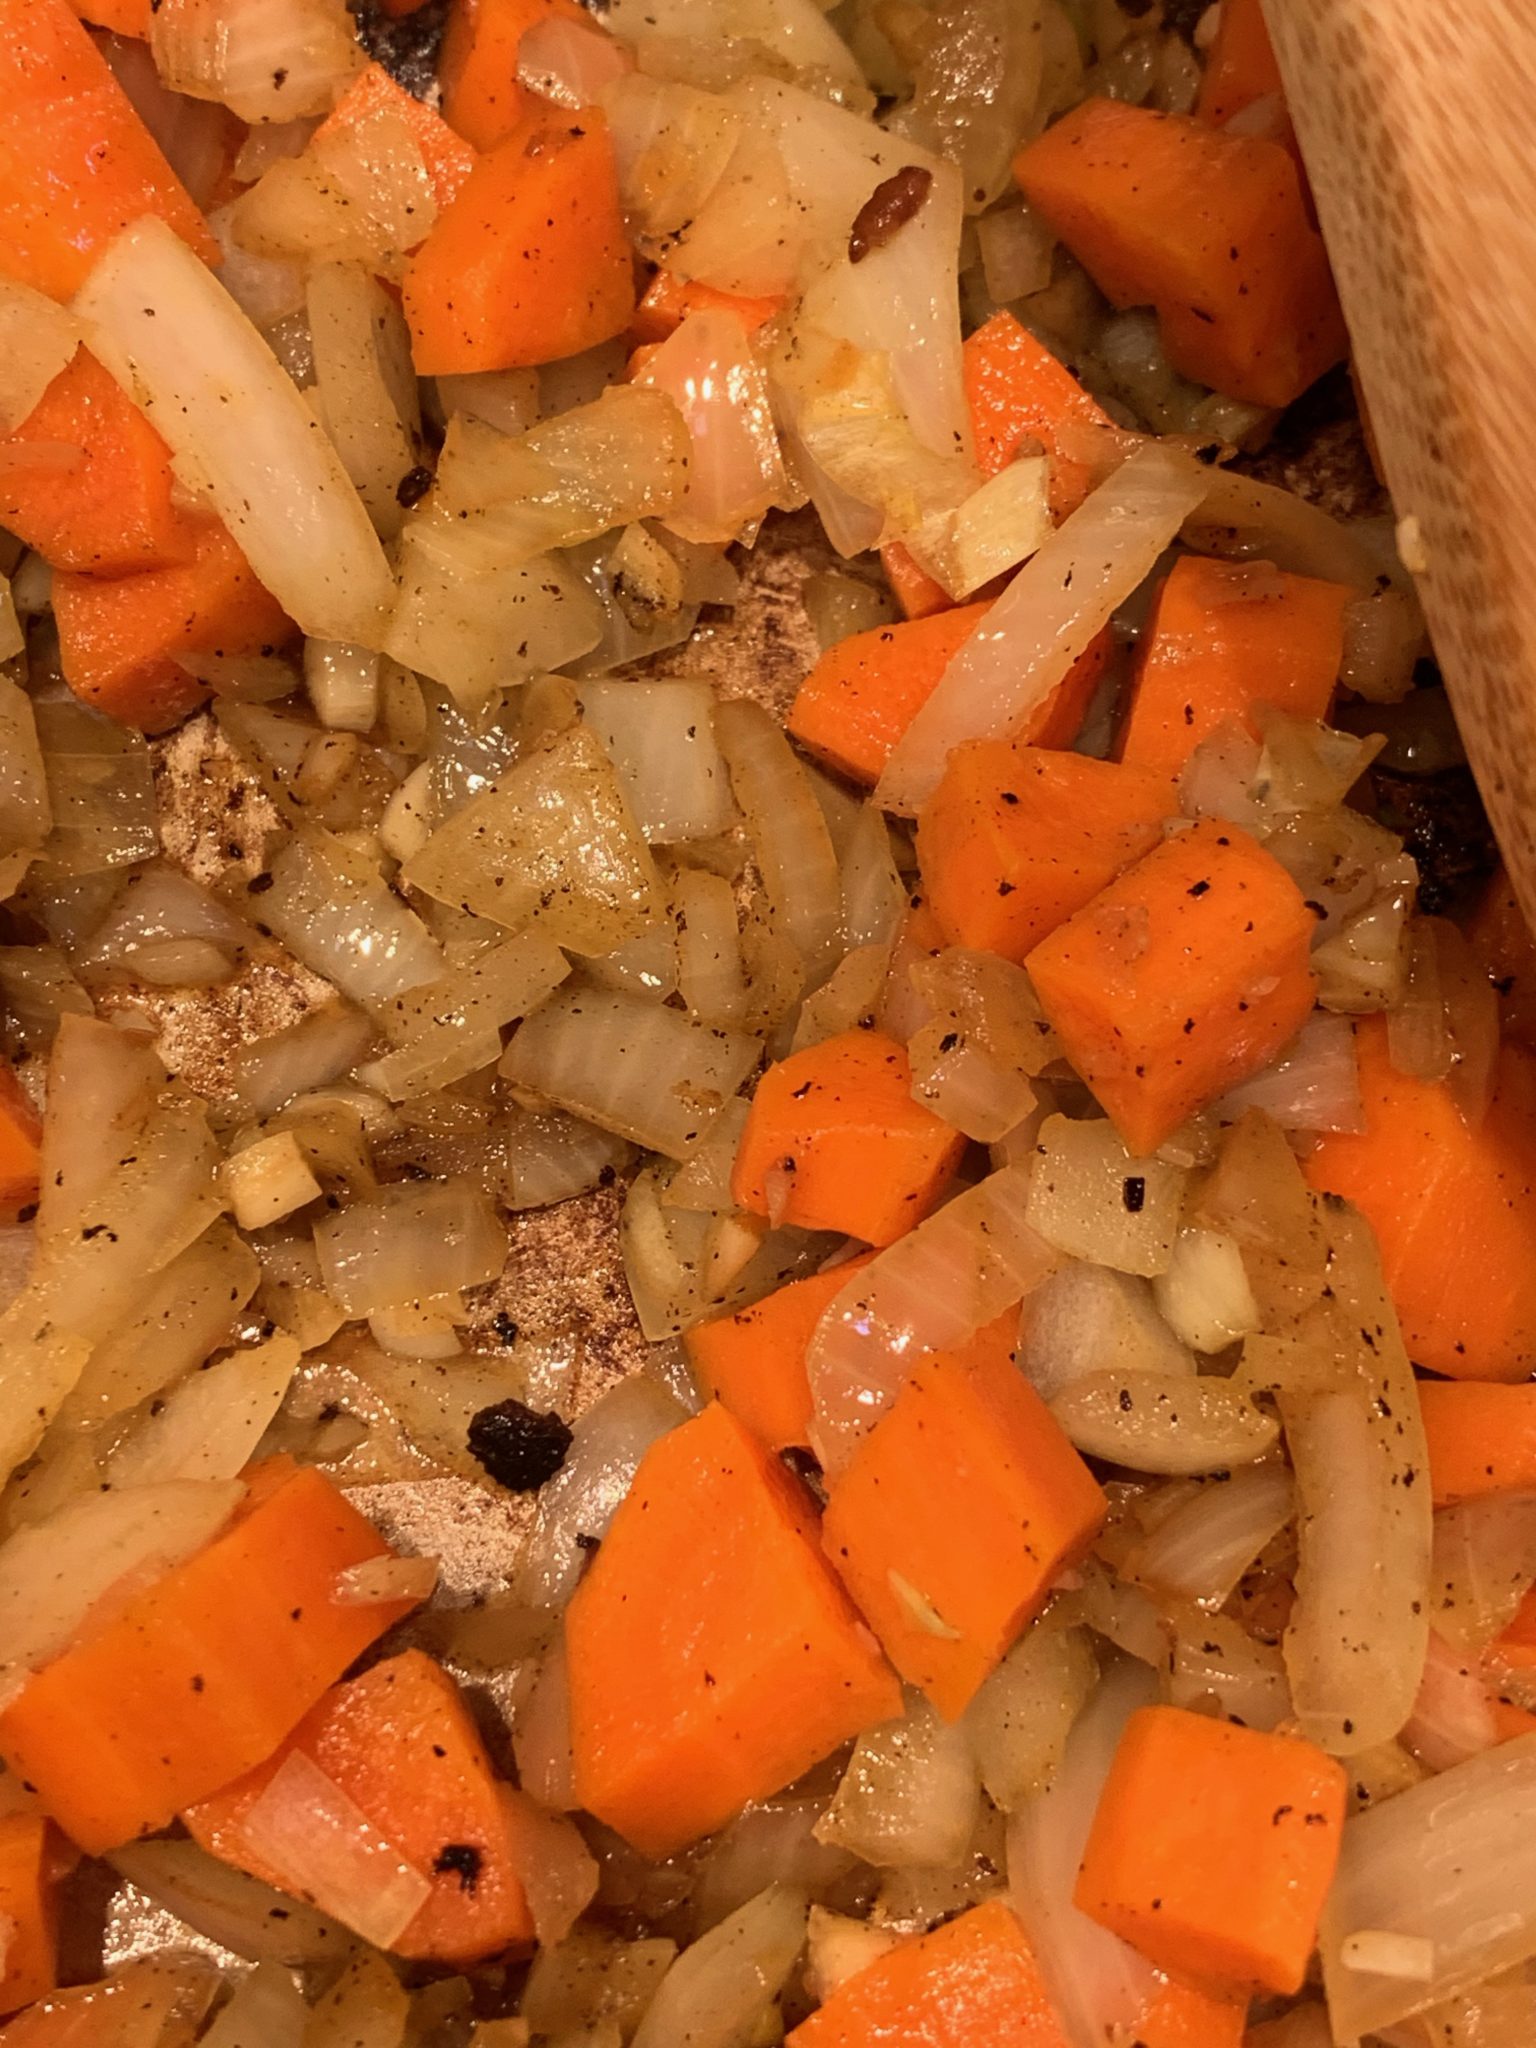 Carrots and onions cooked until soft